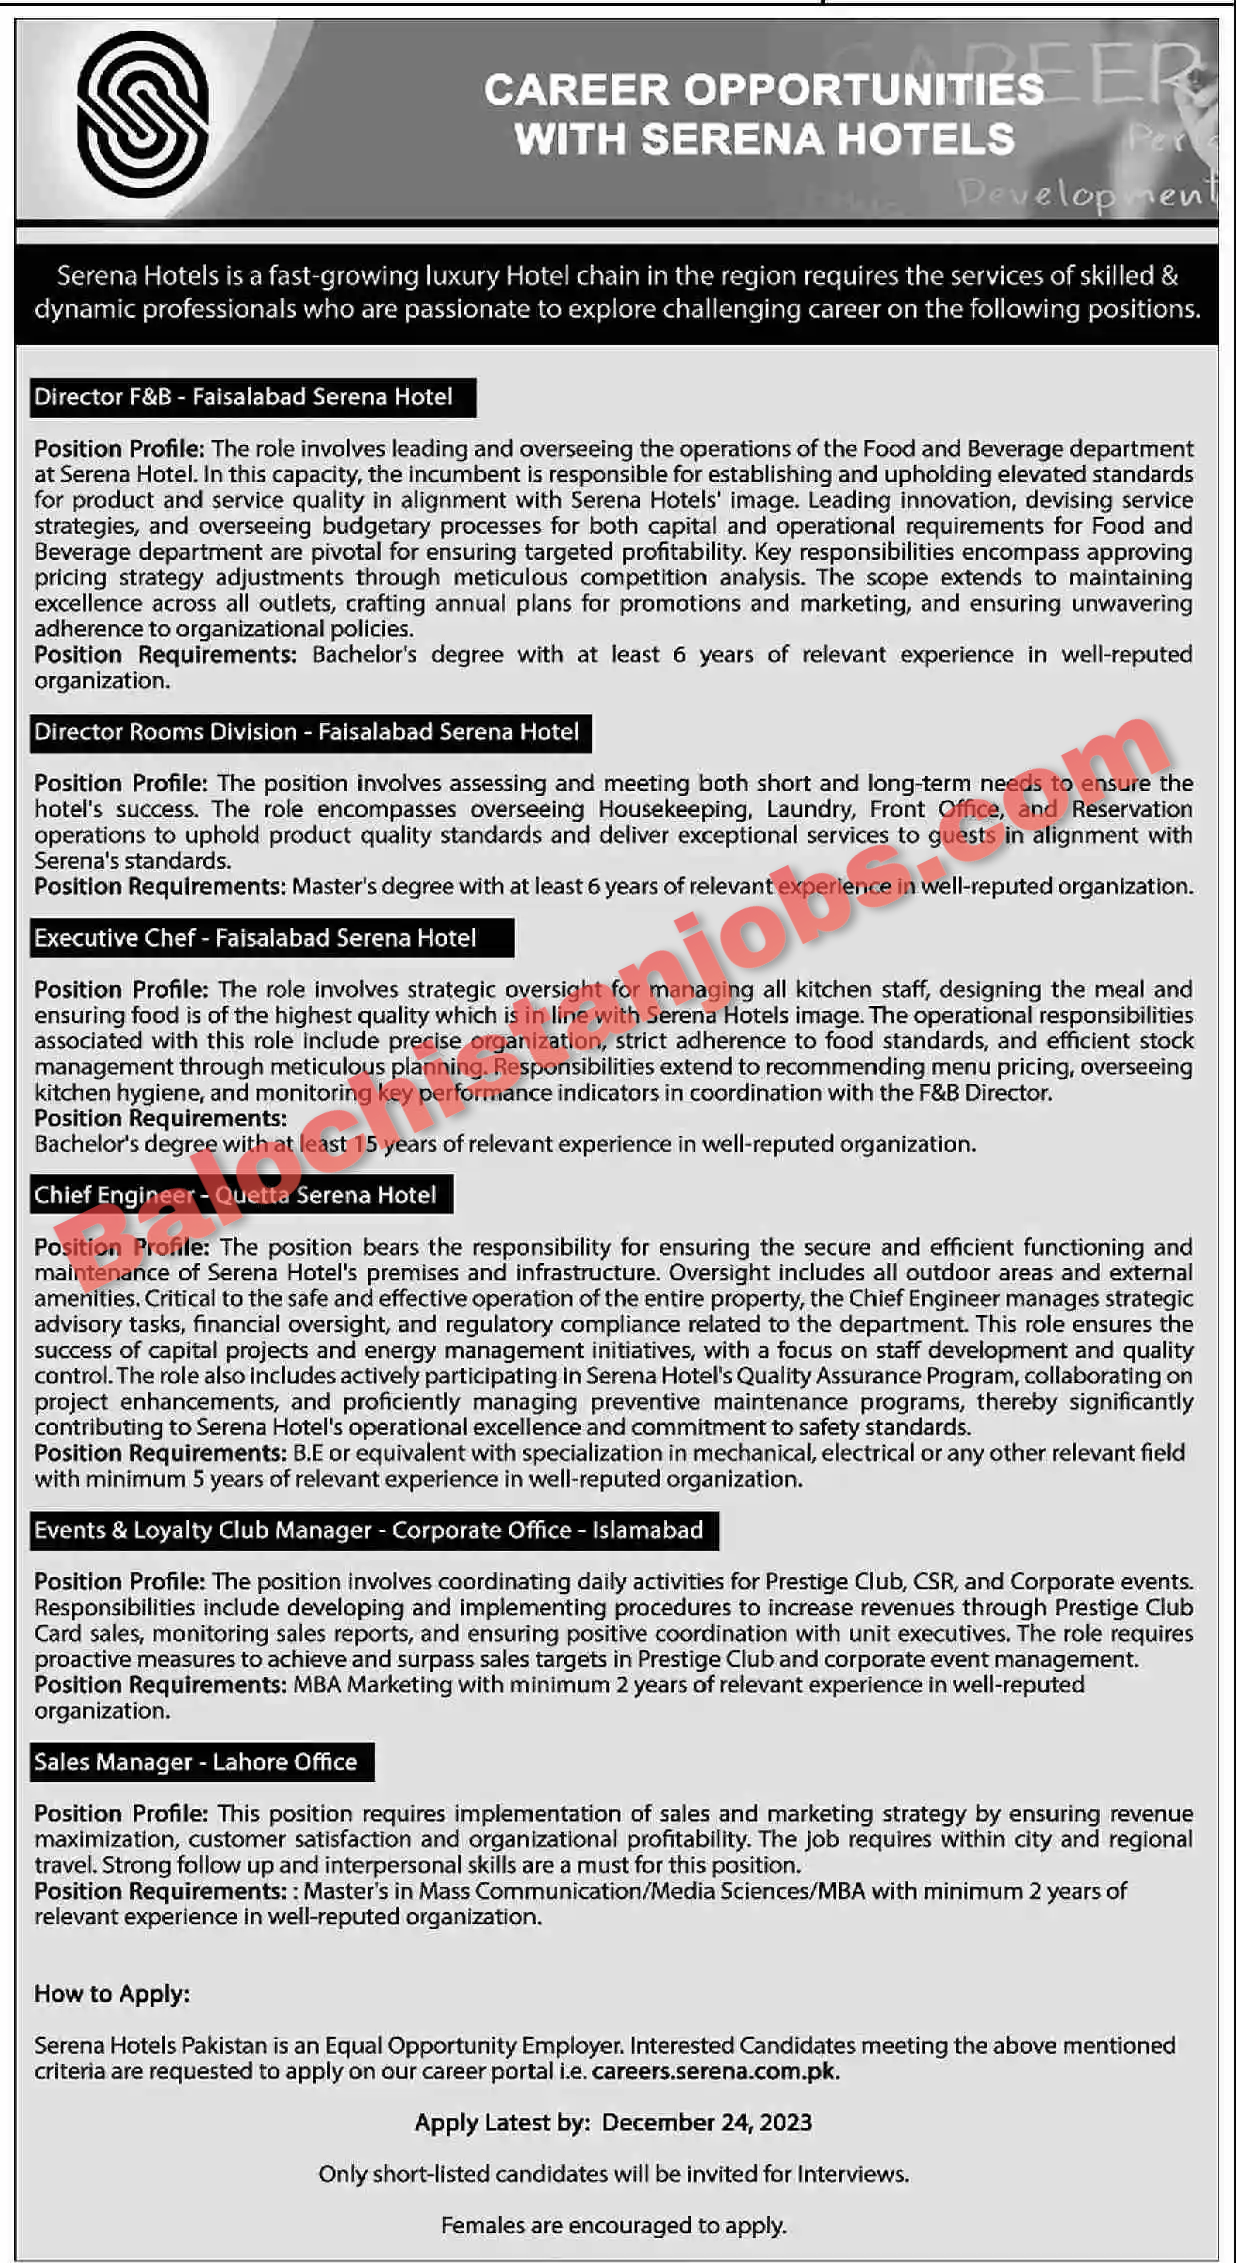 Quetta Sarena Hotel Jobs 2023 for Cheif Engineer